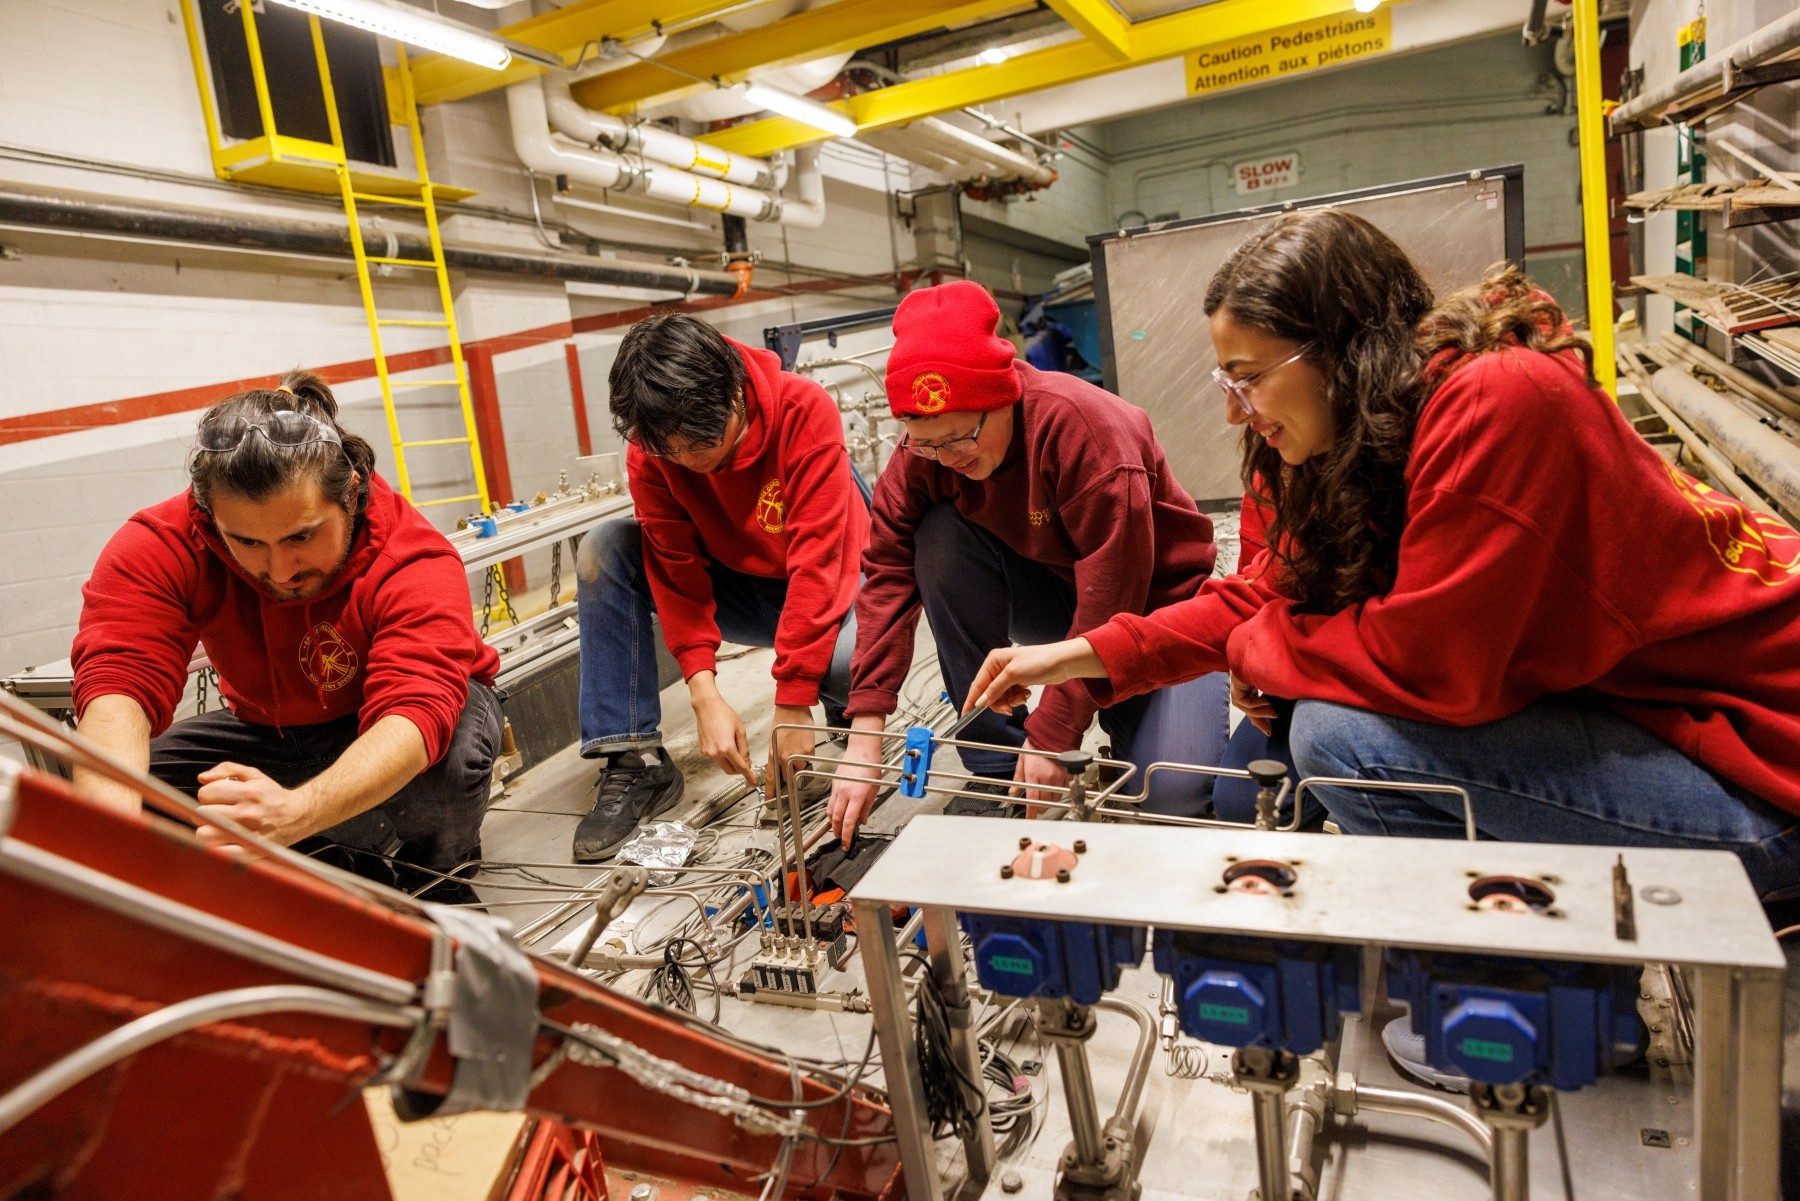 Four students in red sweatshirts are building something together